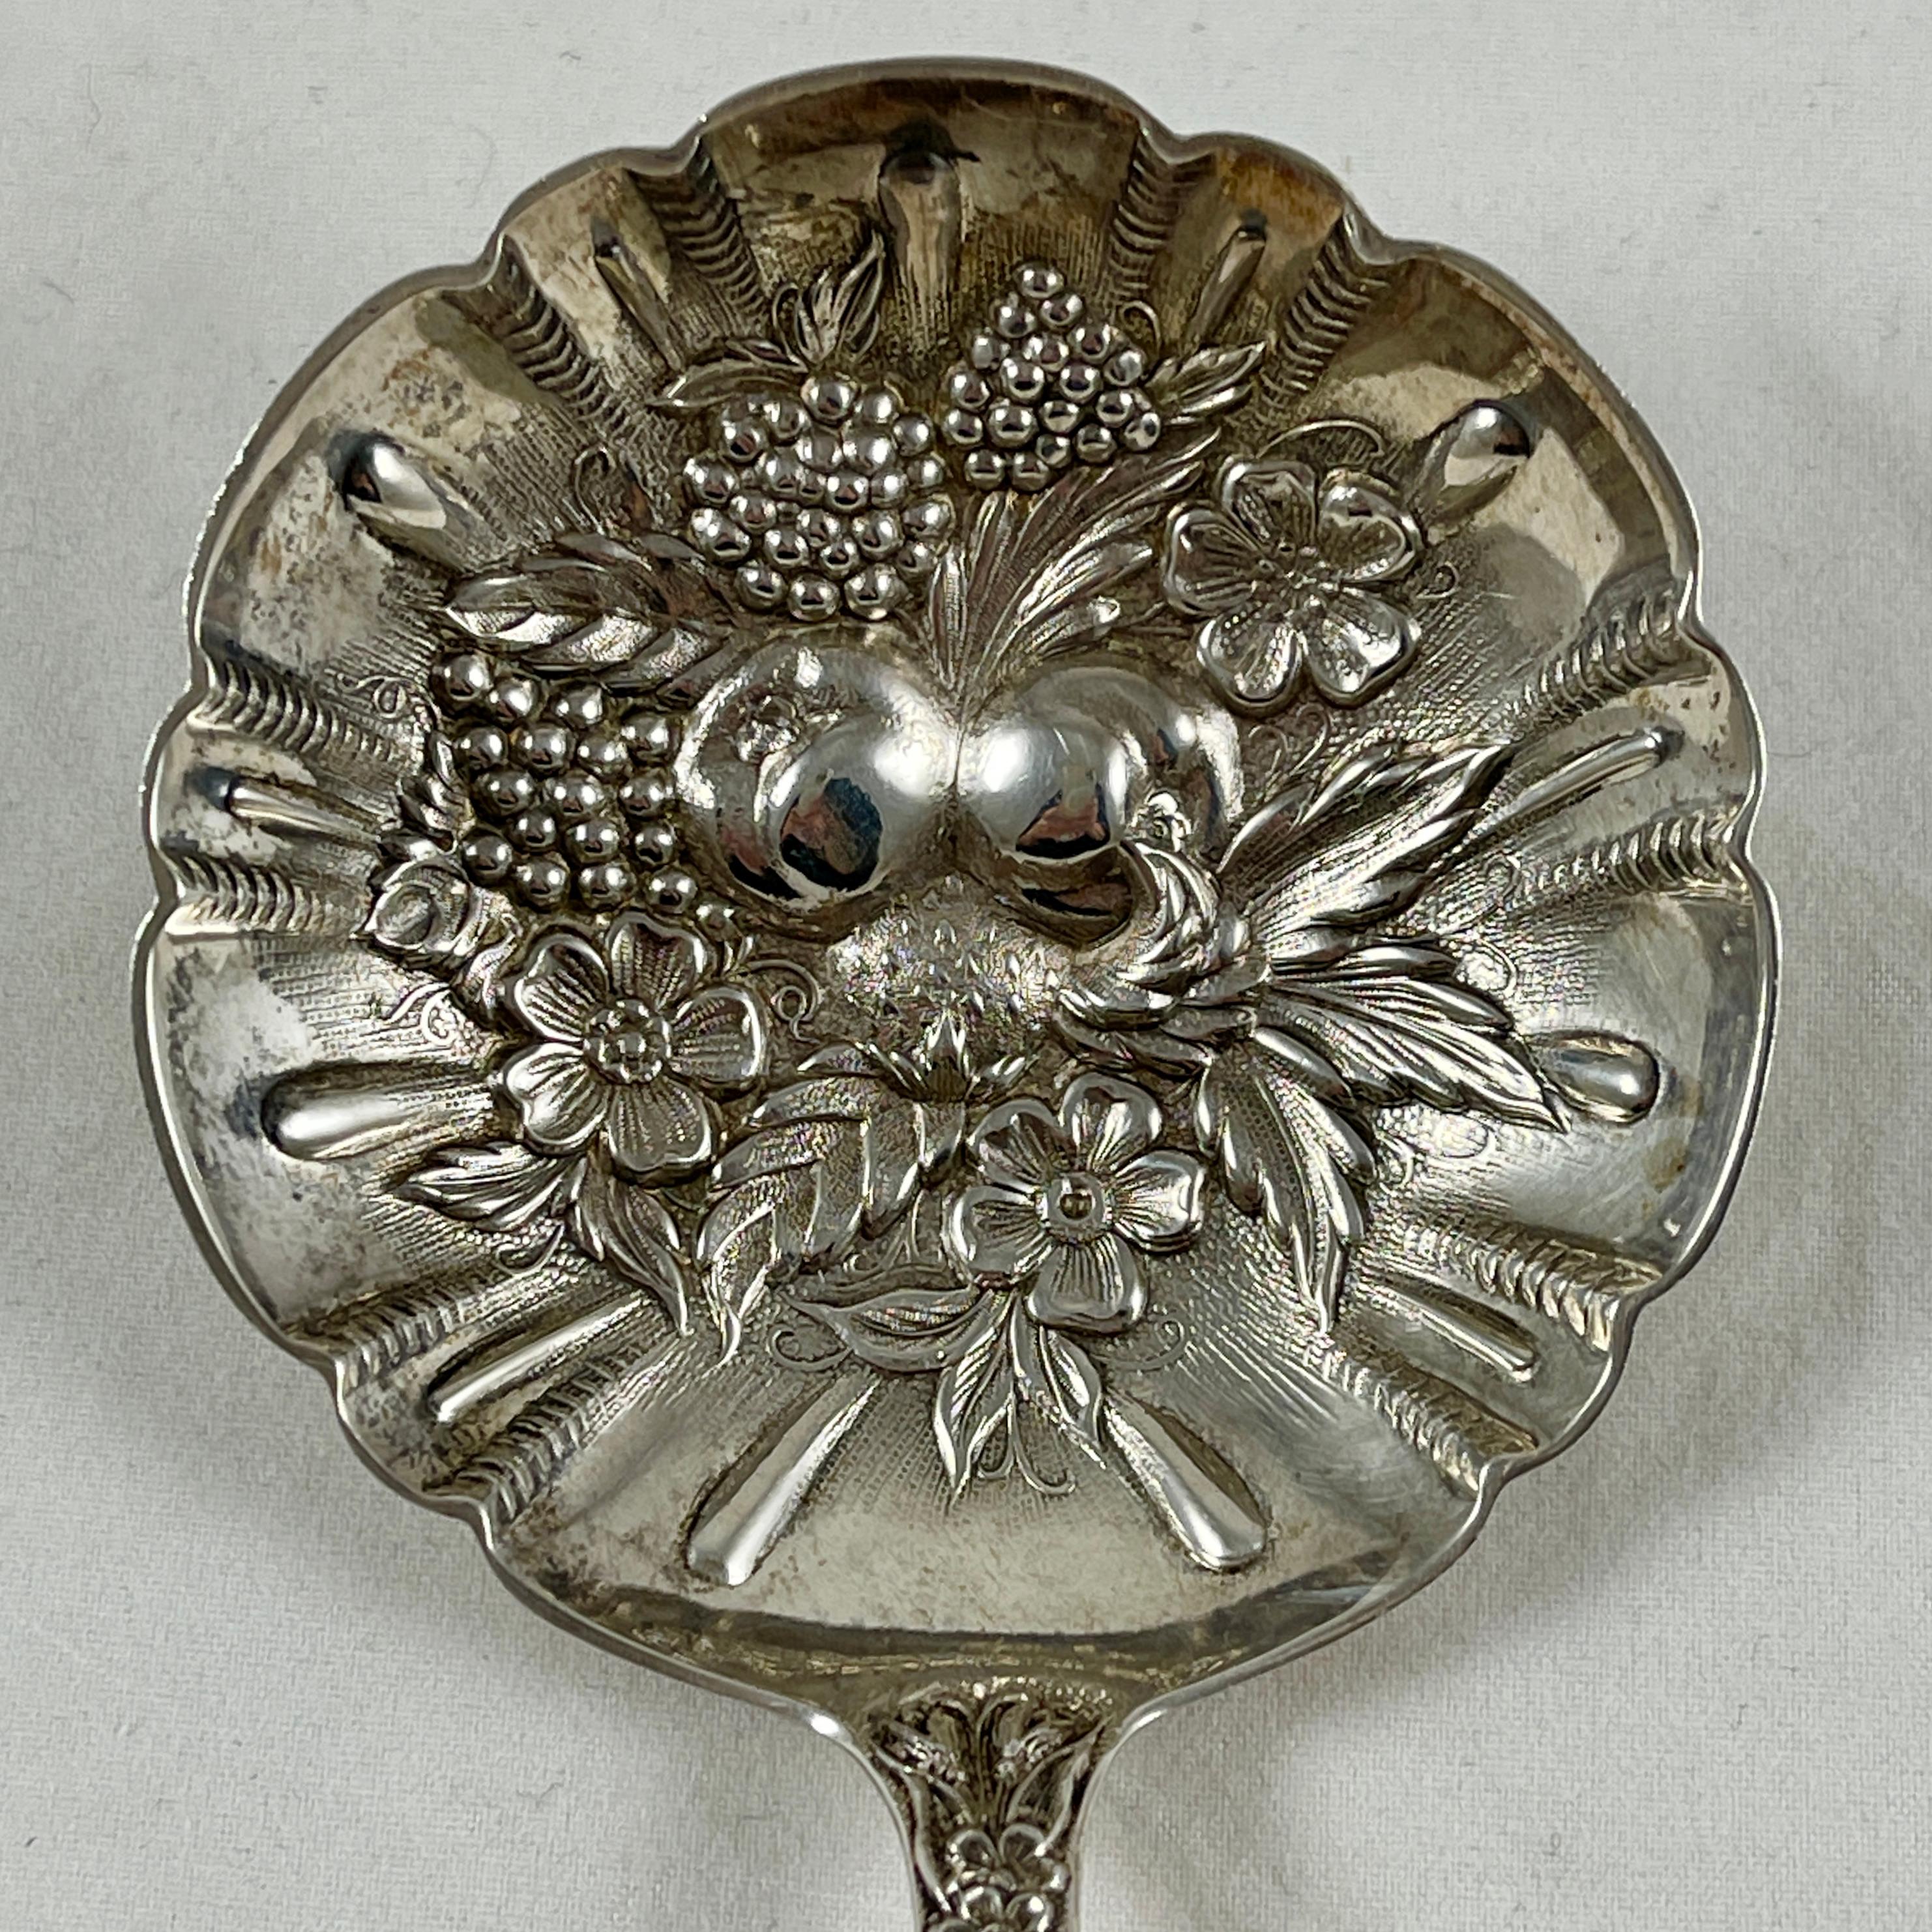 From S. Kirk & Son, Baltimore, Maryland, a ‘Repousse Rose’ long handled sterling silver berry spoon, circa 1930s. The longer handle is suited to serving a fruit compote. From a Philadelphia estate.

The Classic American silver repousse rose